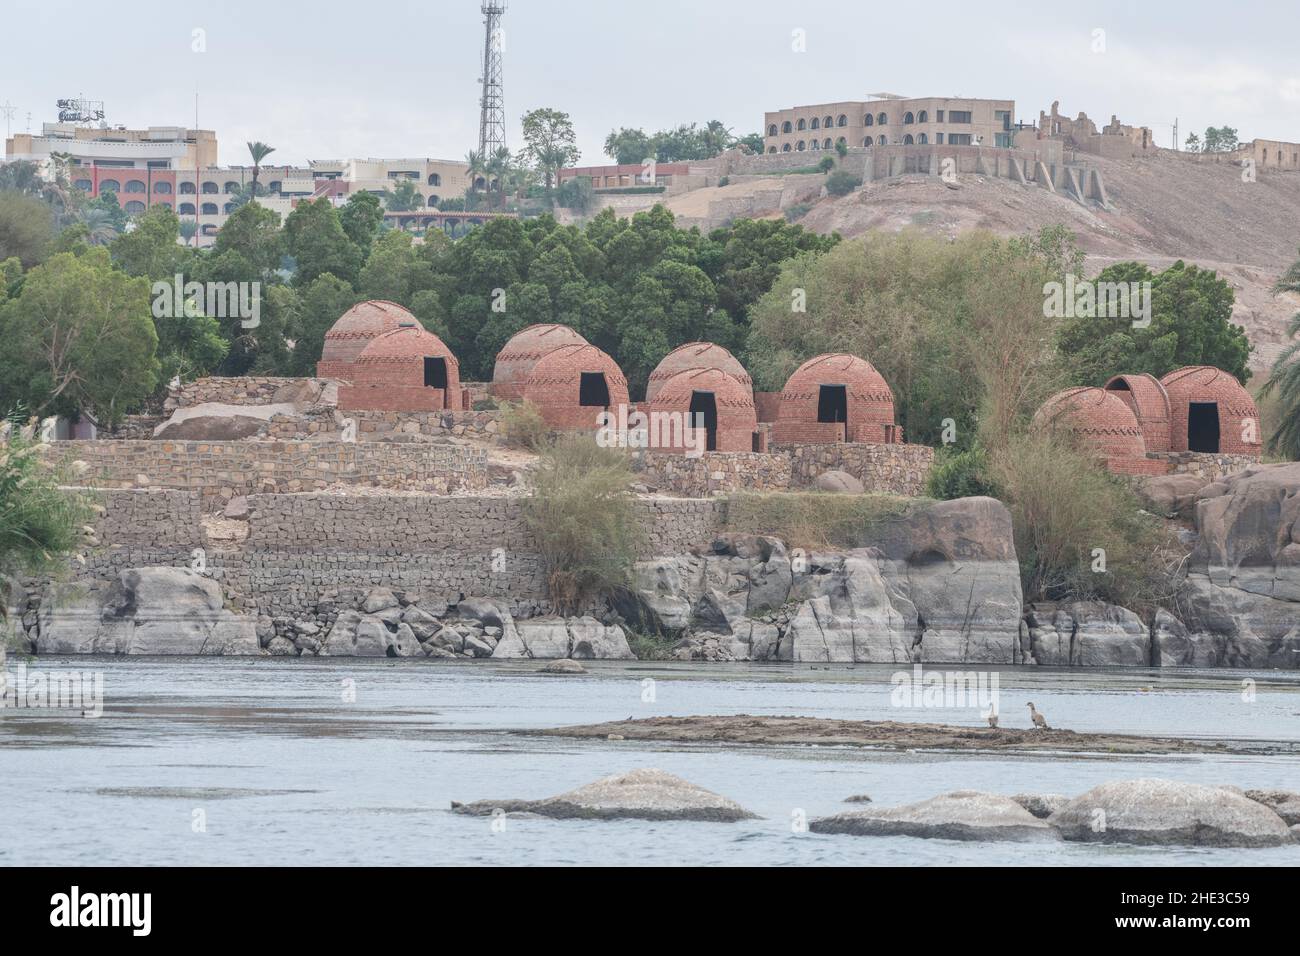 Red brick houses that were illegally constructed along the Nile river in Aswan city, Egypt and now sit empty awaiting demolition. Stock Photo